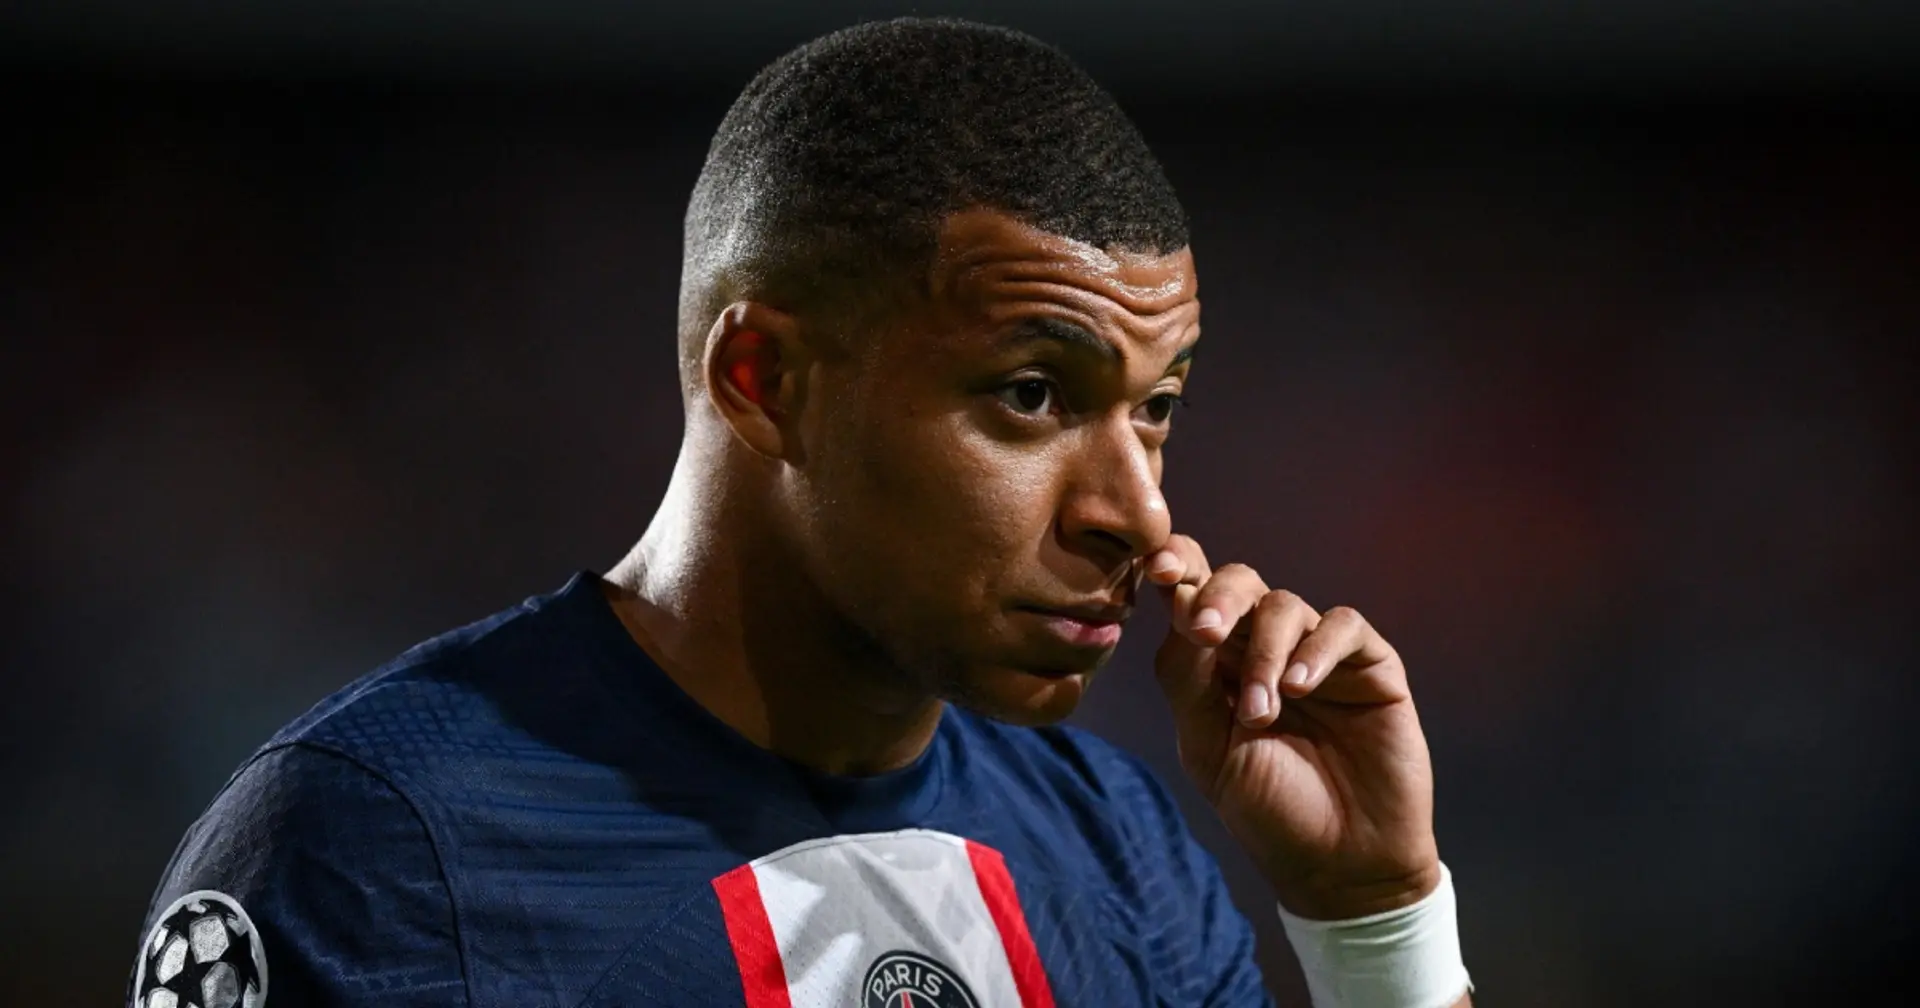 Mbappe 'unlikely to consider' joining Man United & 3 more under-radar stories